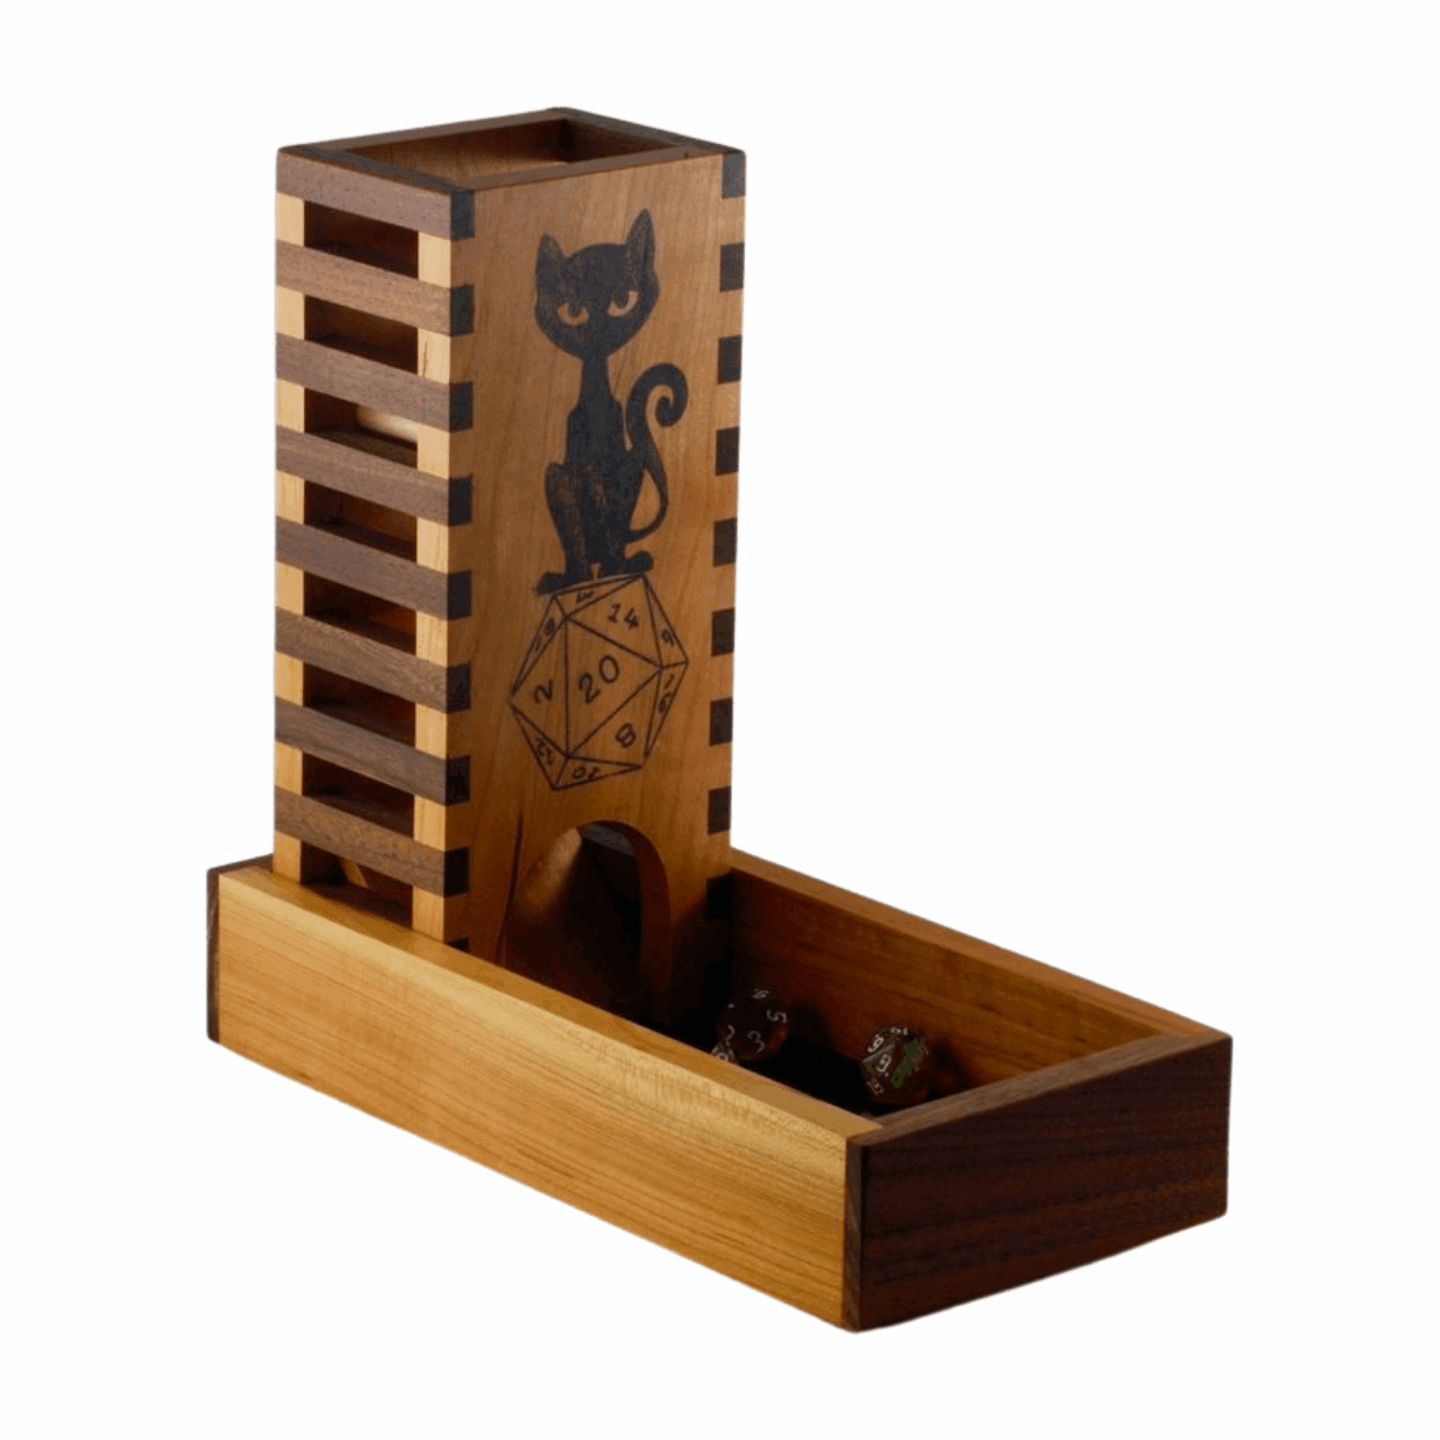 Wooden Tower with cat and D20 image in cherry and walnut dice tray